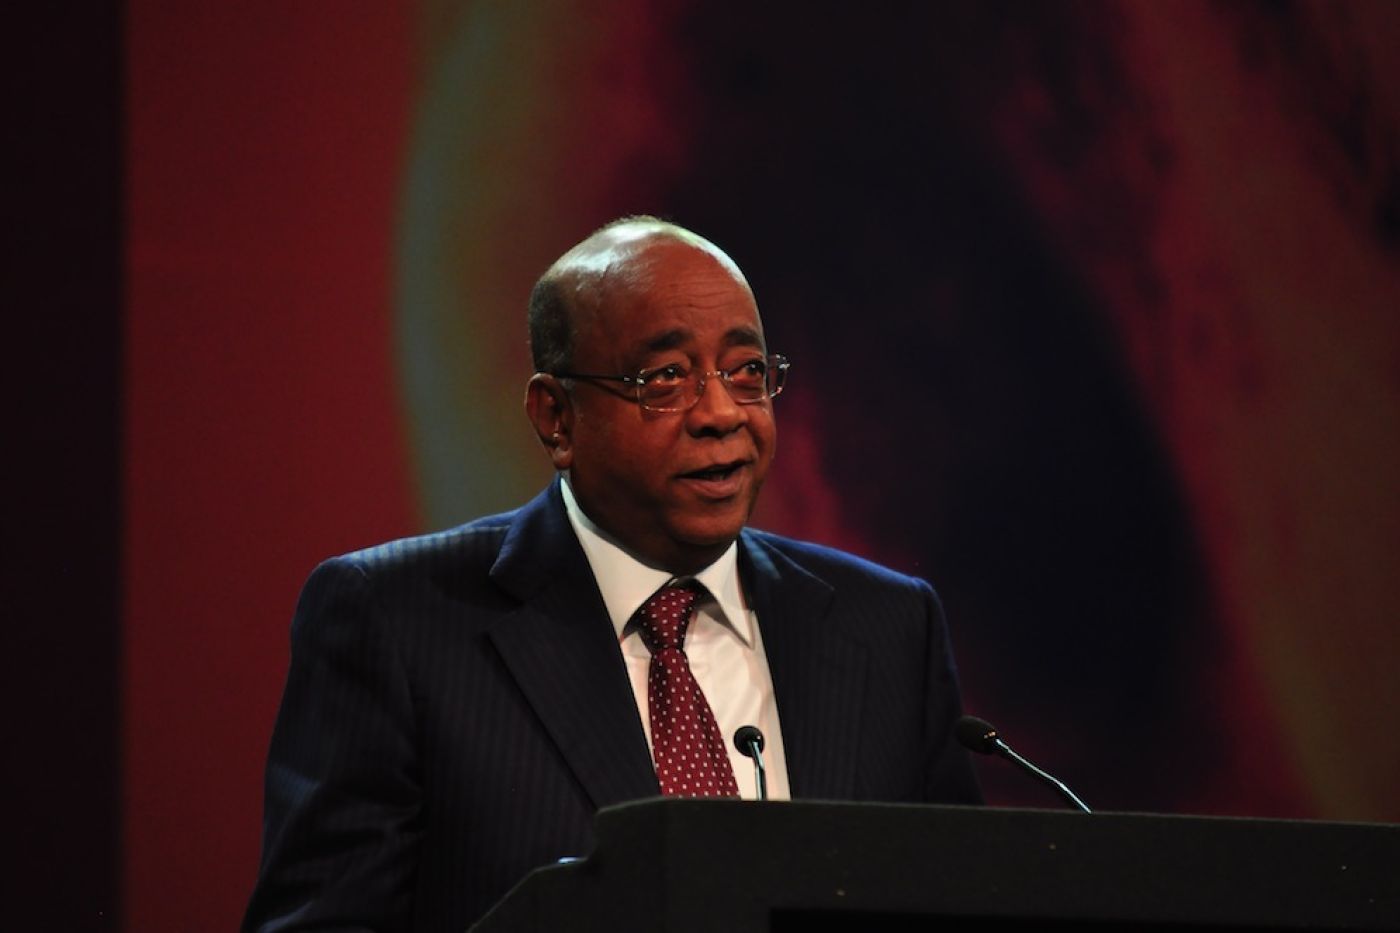 Mo Ibrahim delivers the 11th Nelson Mandela Annual Lecture